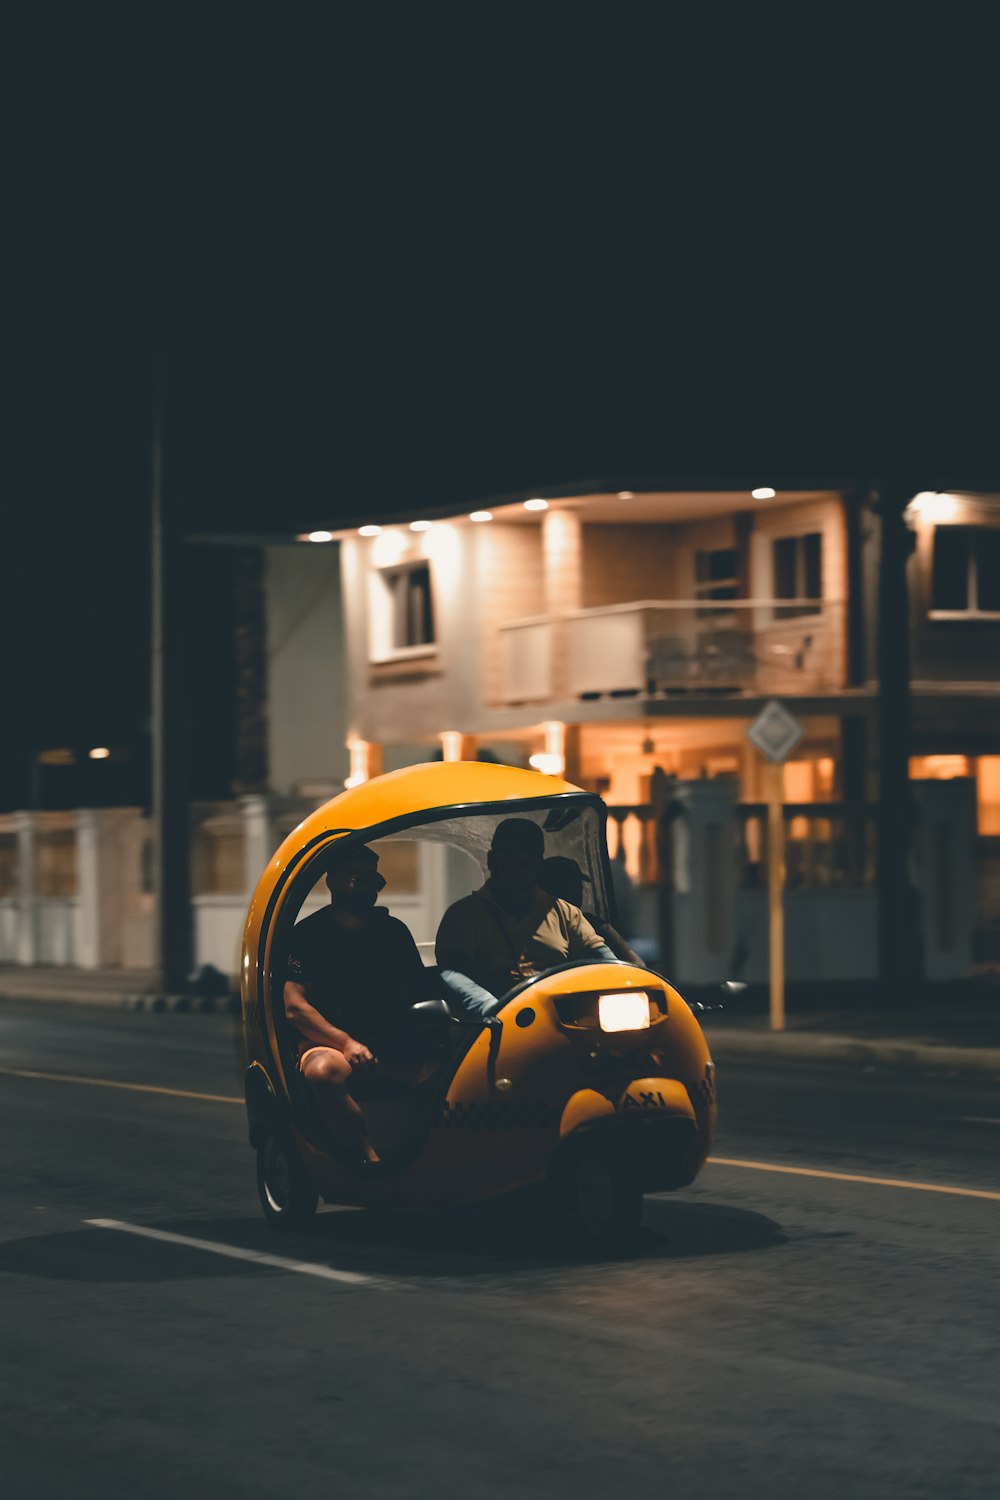 a yellow car driving down a street at night